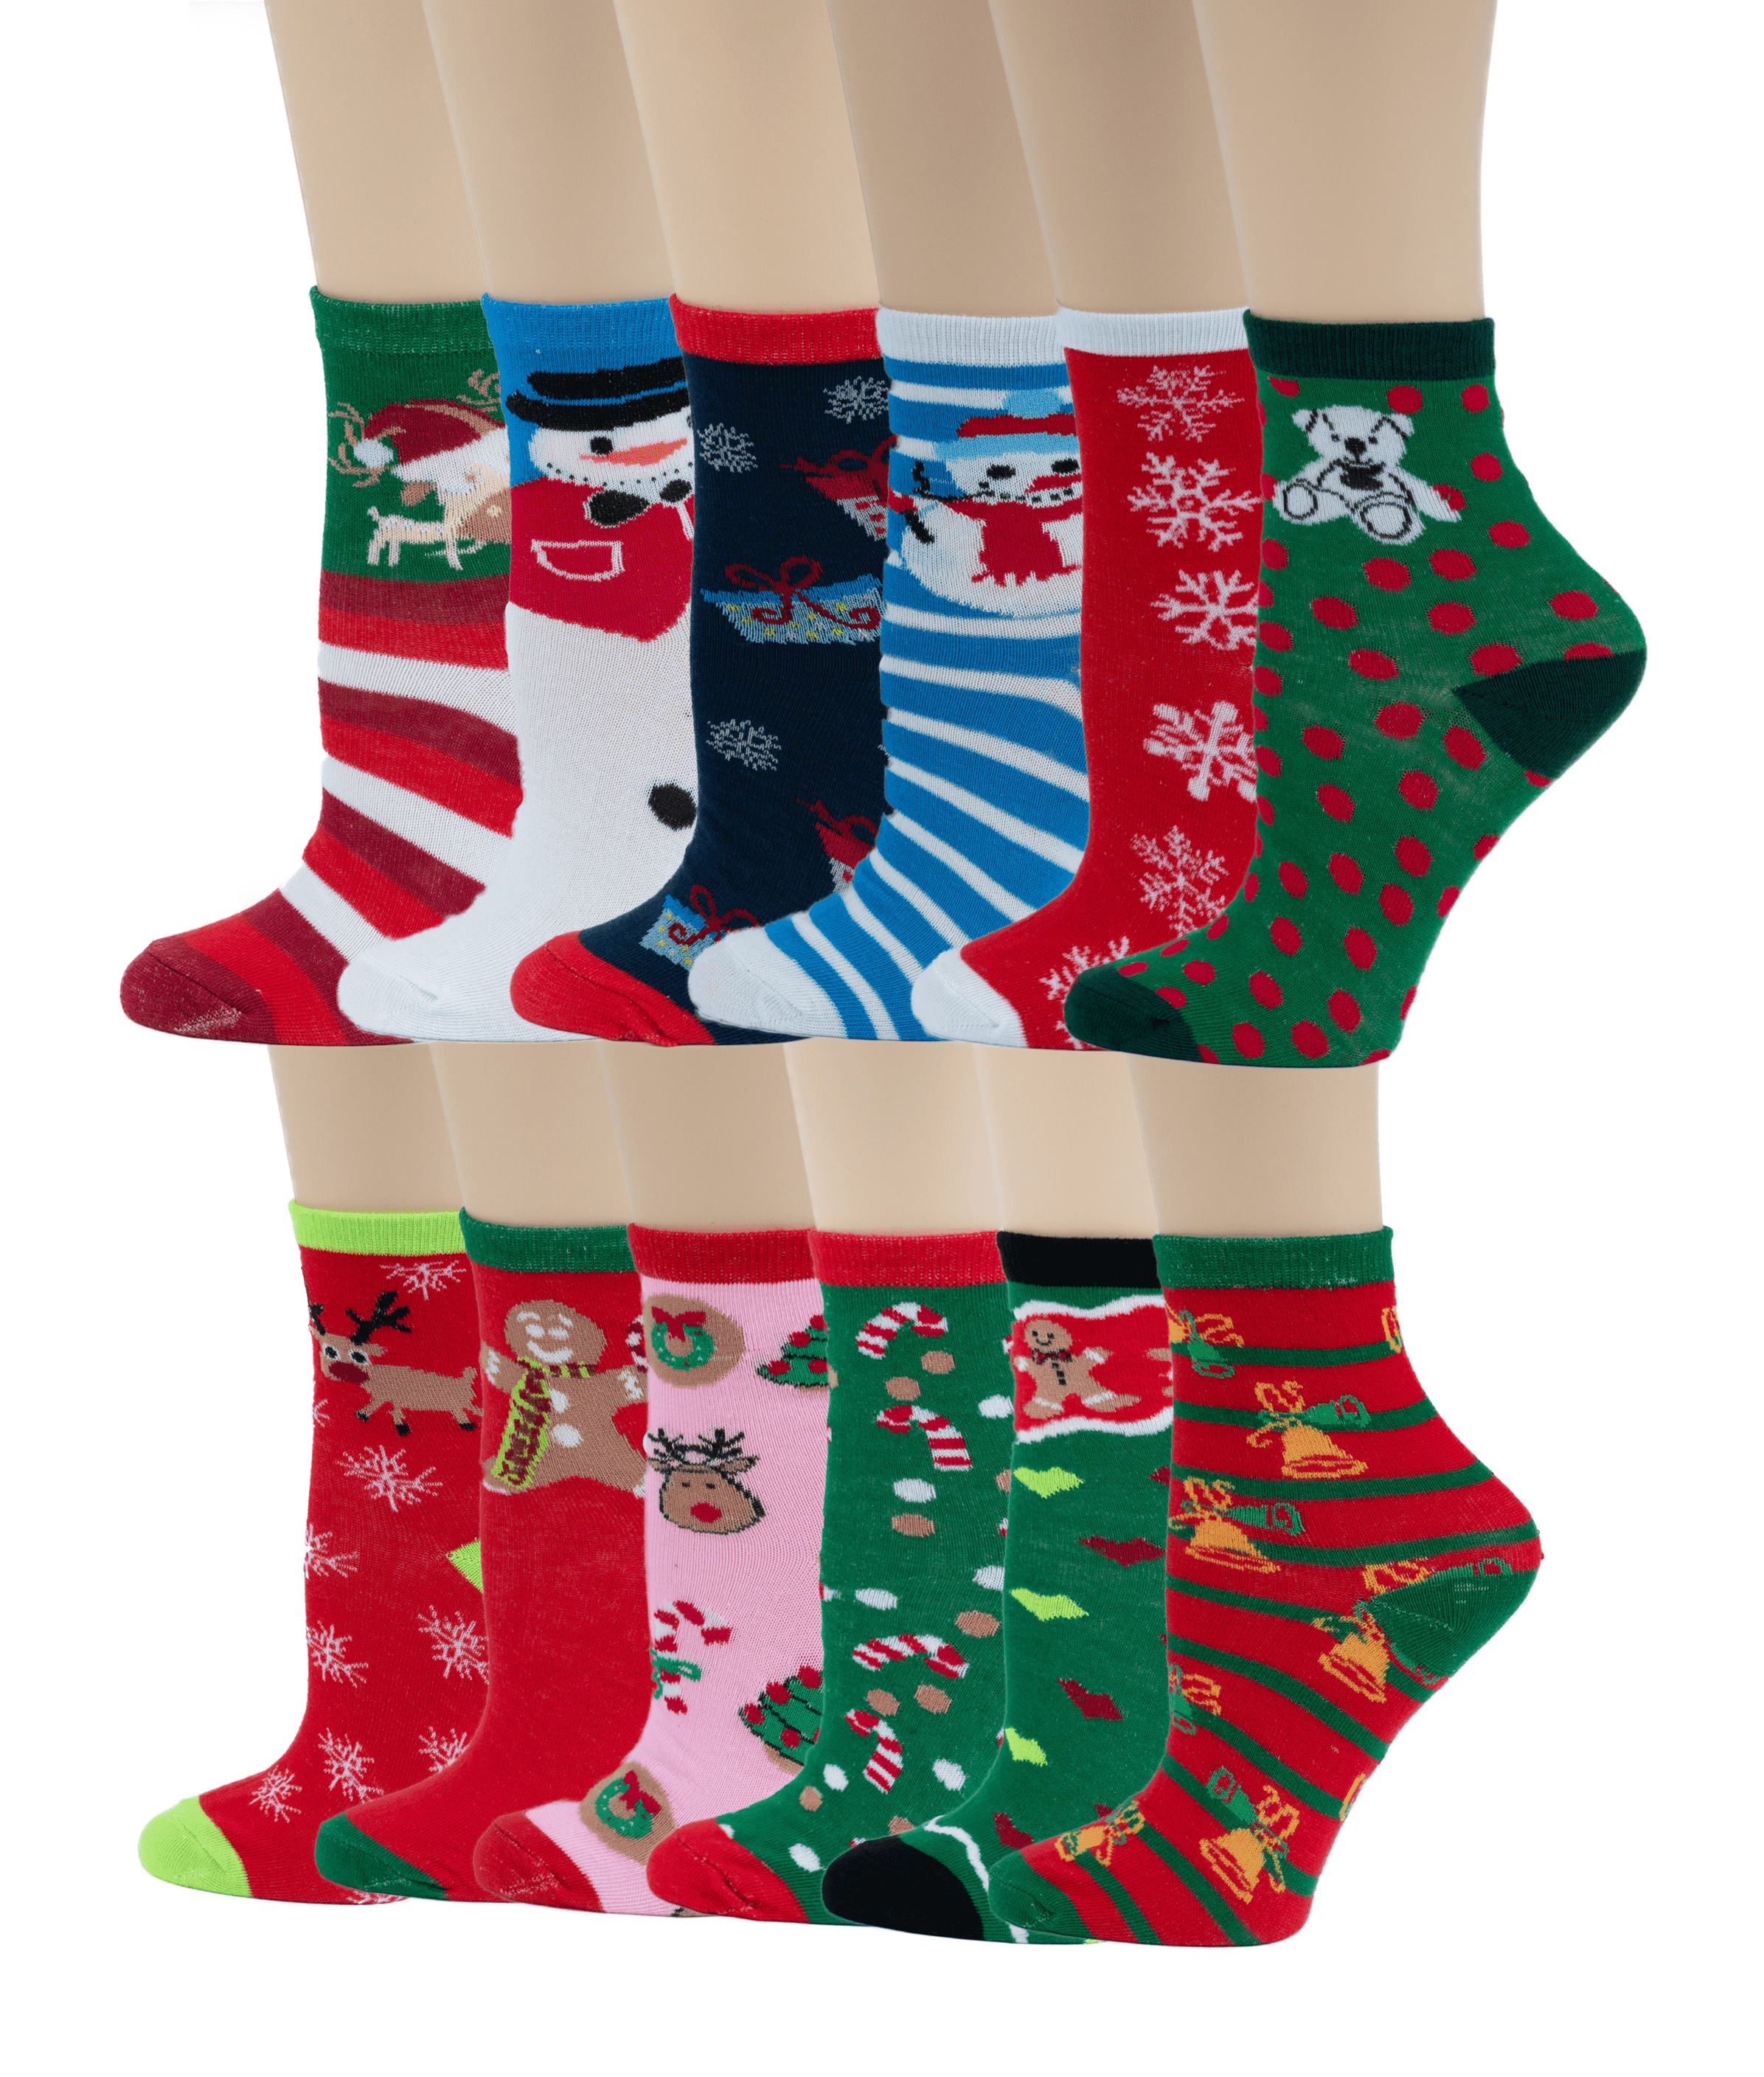 Kids Boys Girls Christmas Xmas Cotton Novelty Socks in 1 3 or 5 set Age 5 to 12 